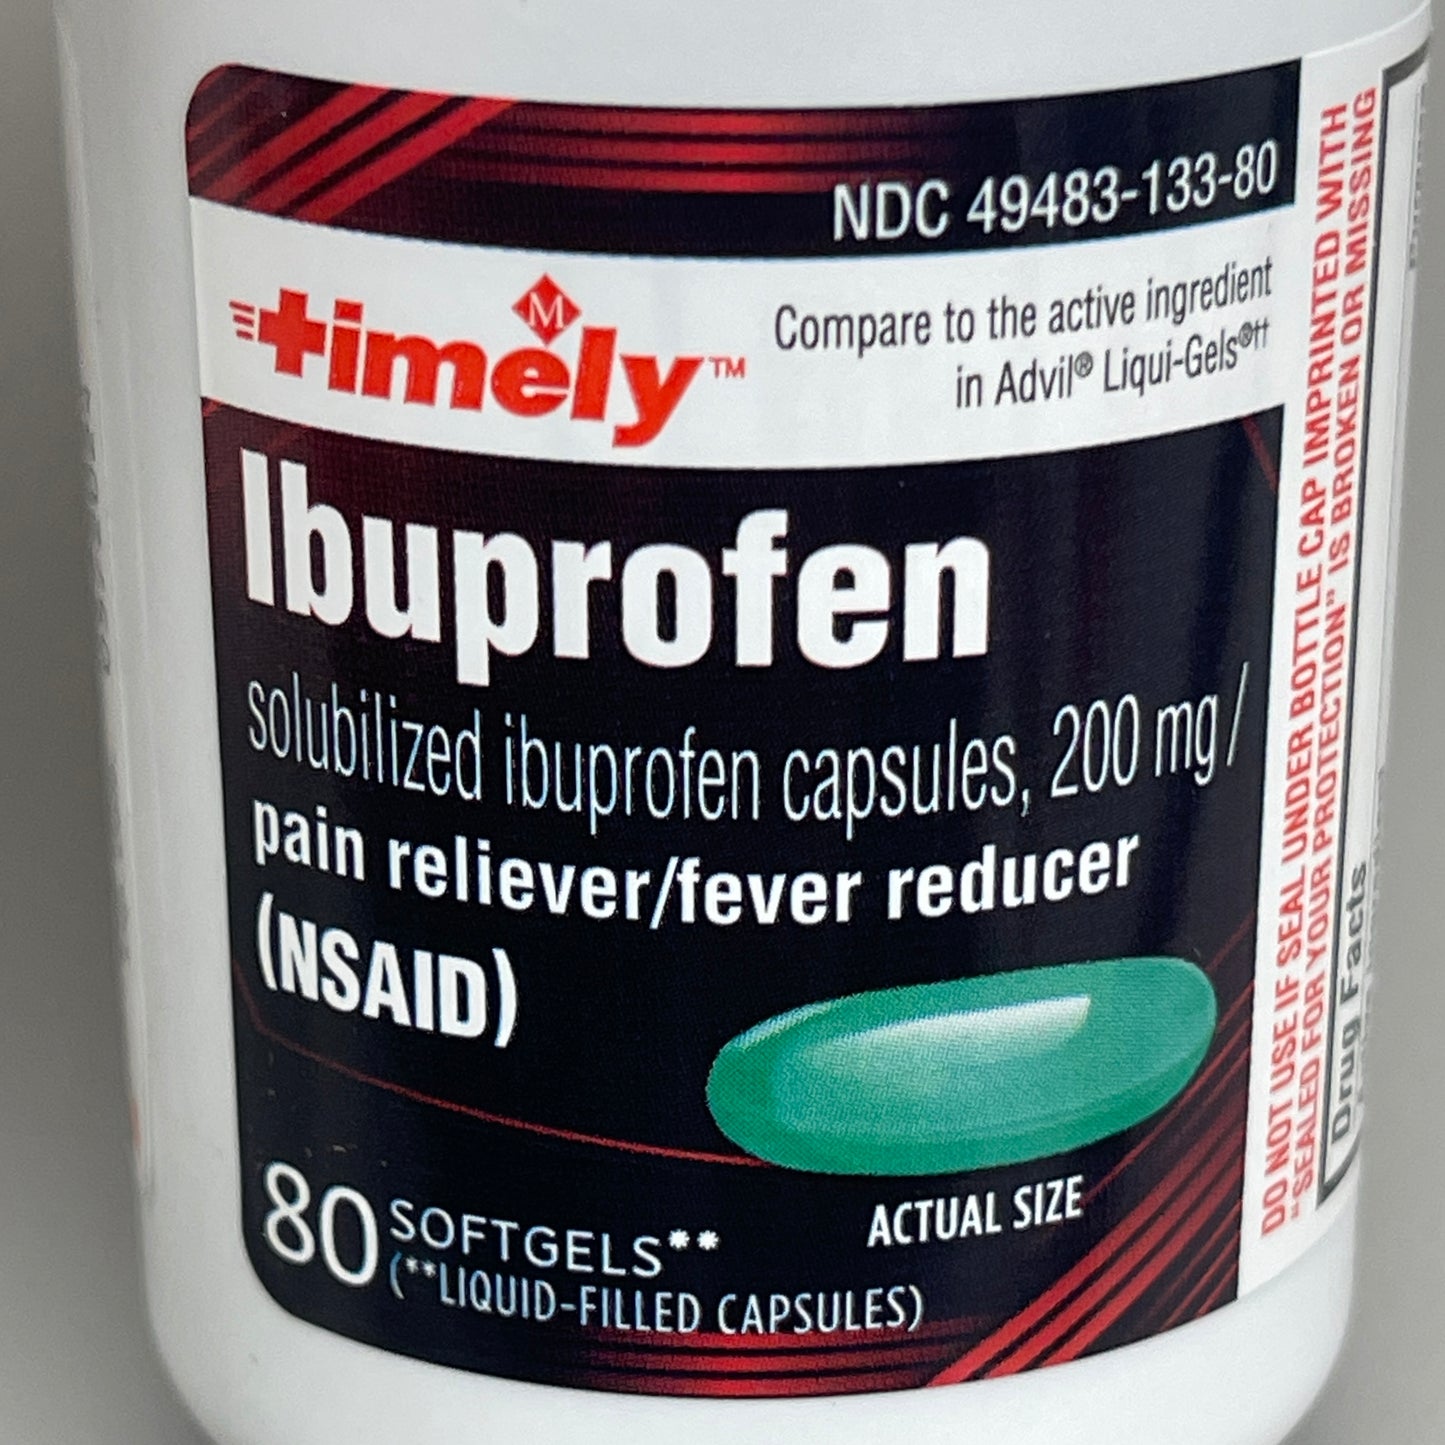 TIMELY Ibuprofen 18-PACK! 80 Softgels 200mg Pain Reliever/Fever Reducer BB 05/24 (New)